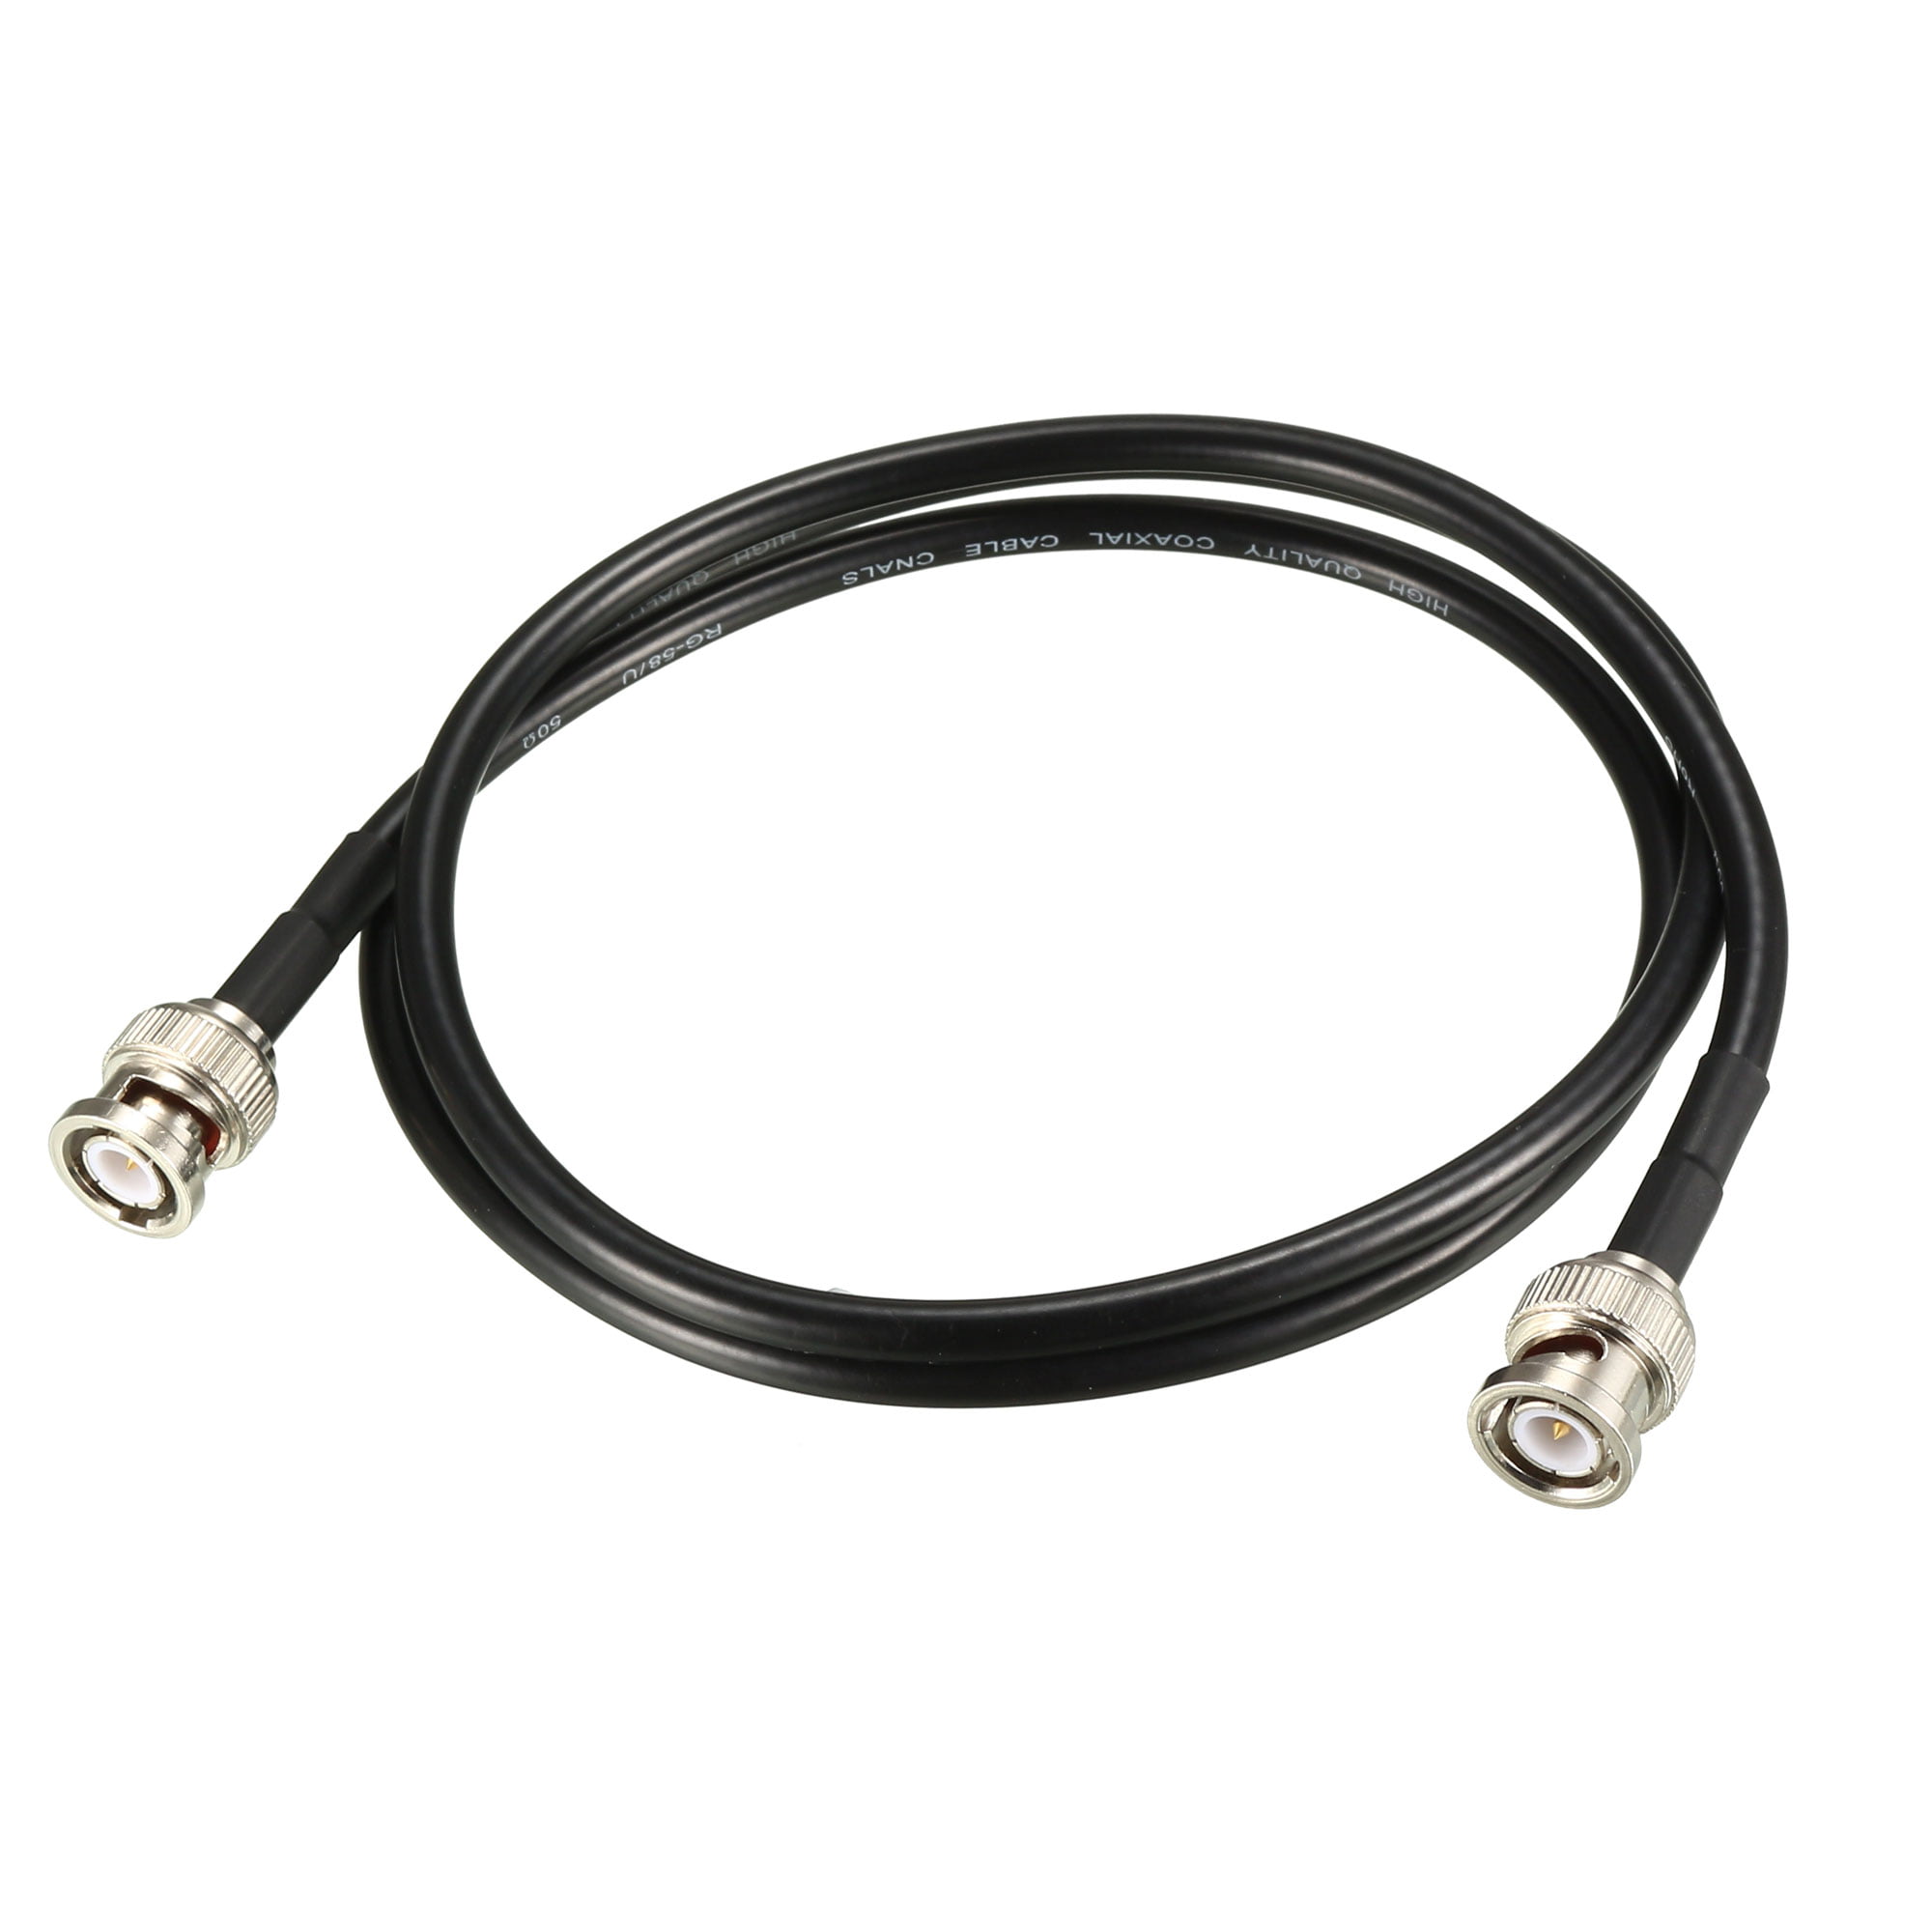 Rg58 Coaxial Cable With Bnc Male To Bnc Male Connectors 50 Ohm 4 Ft 